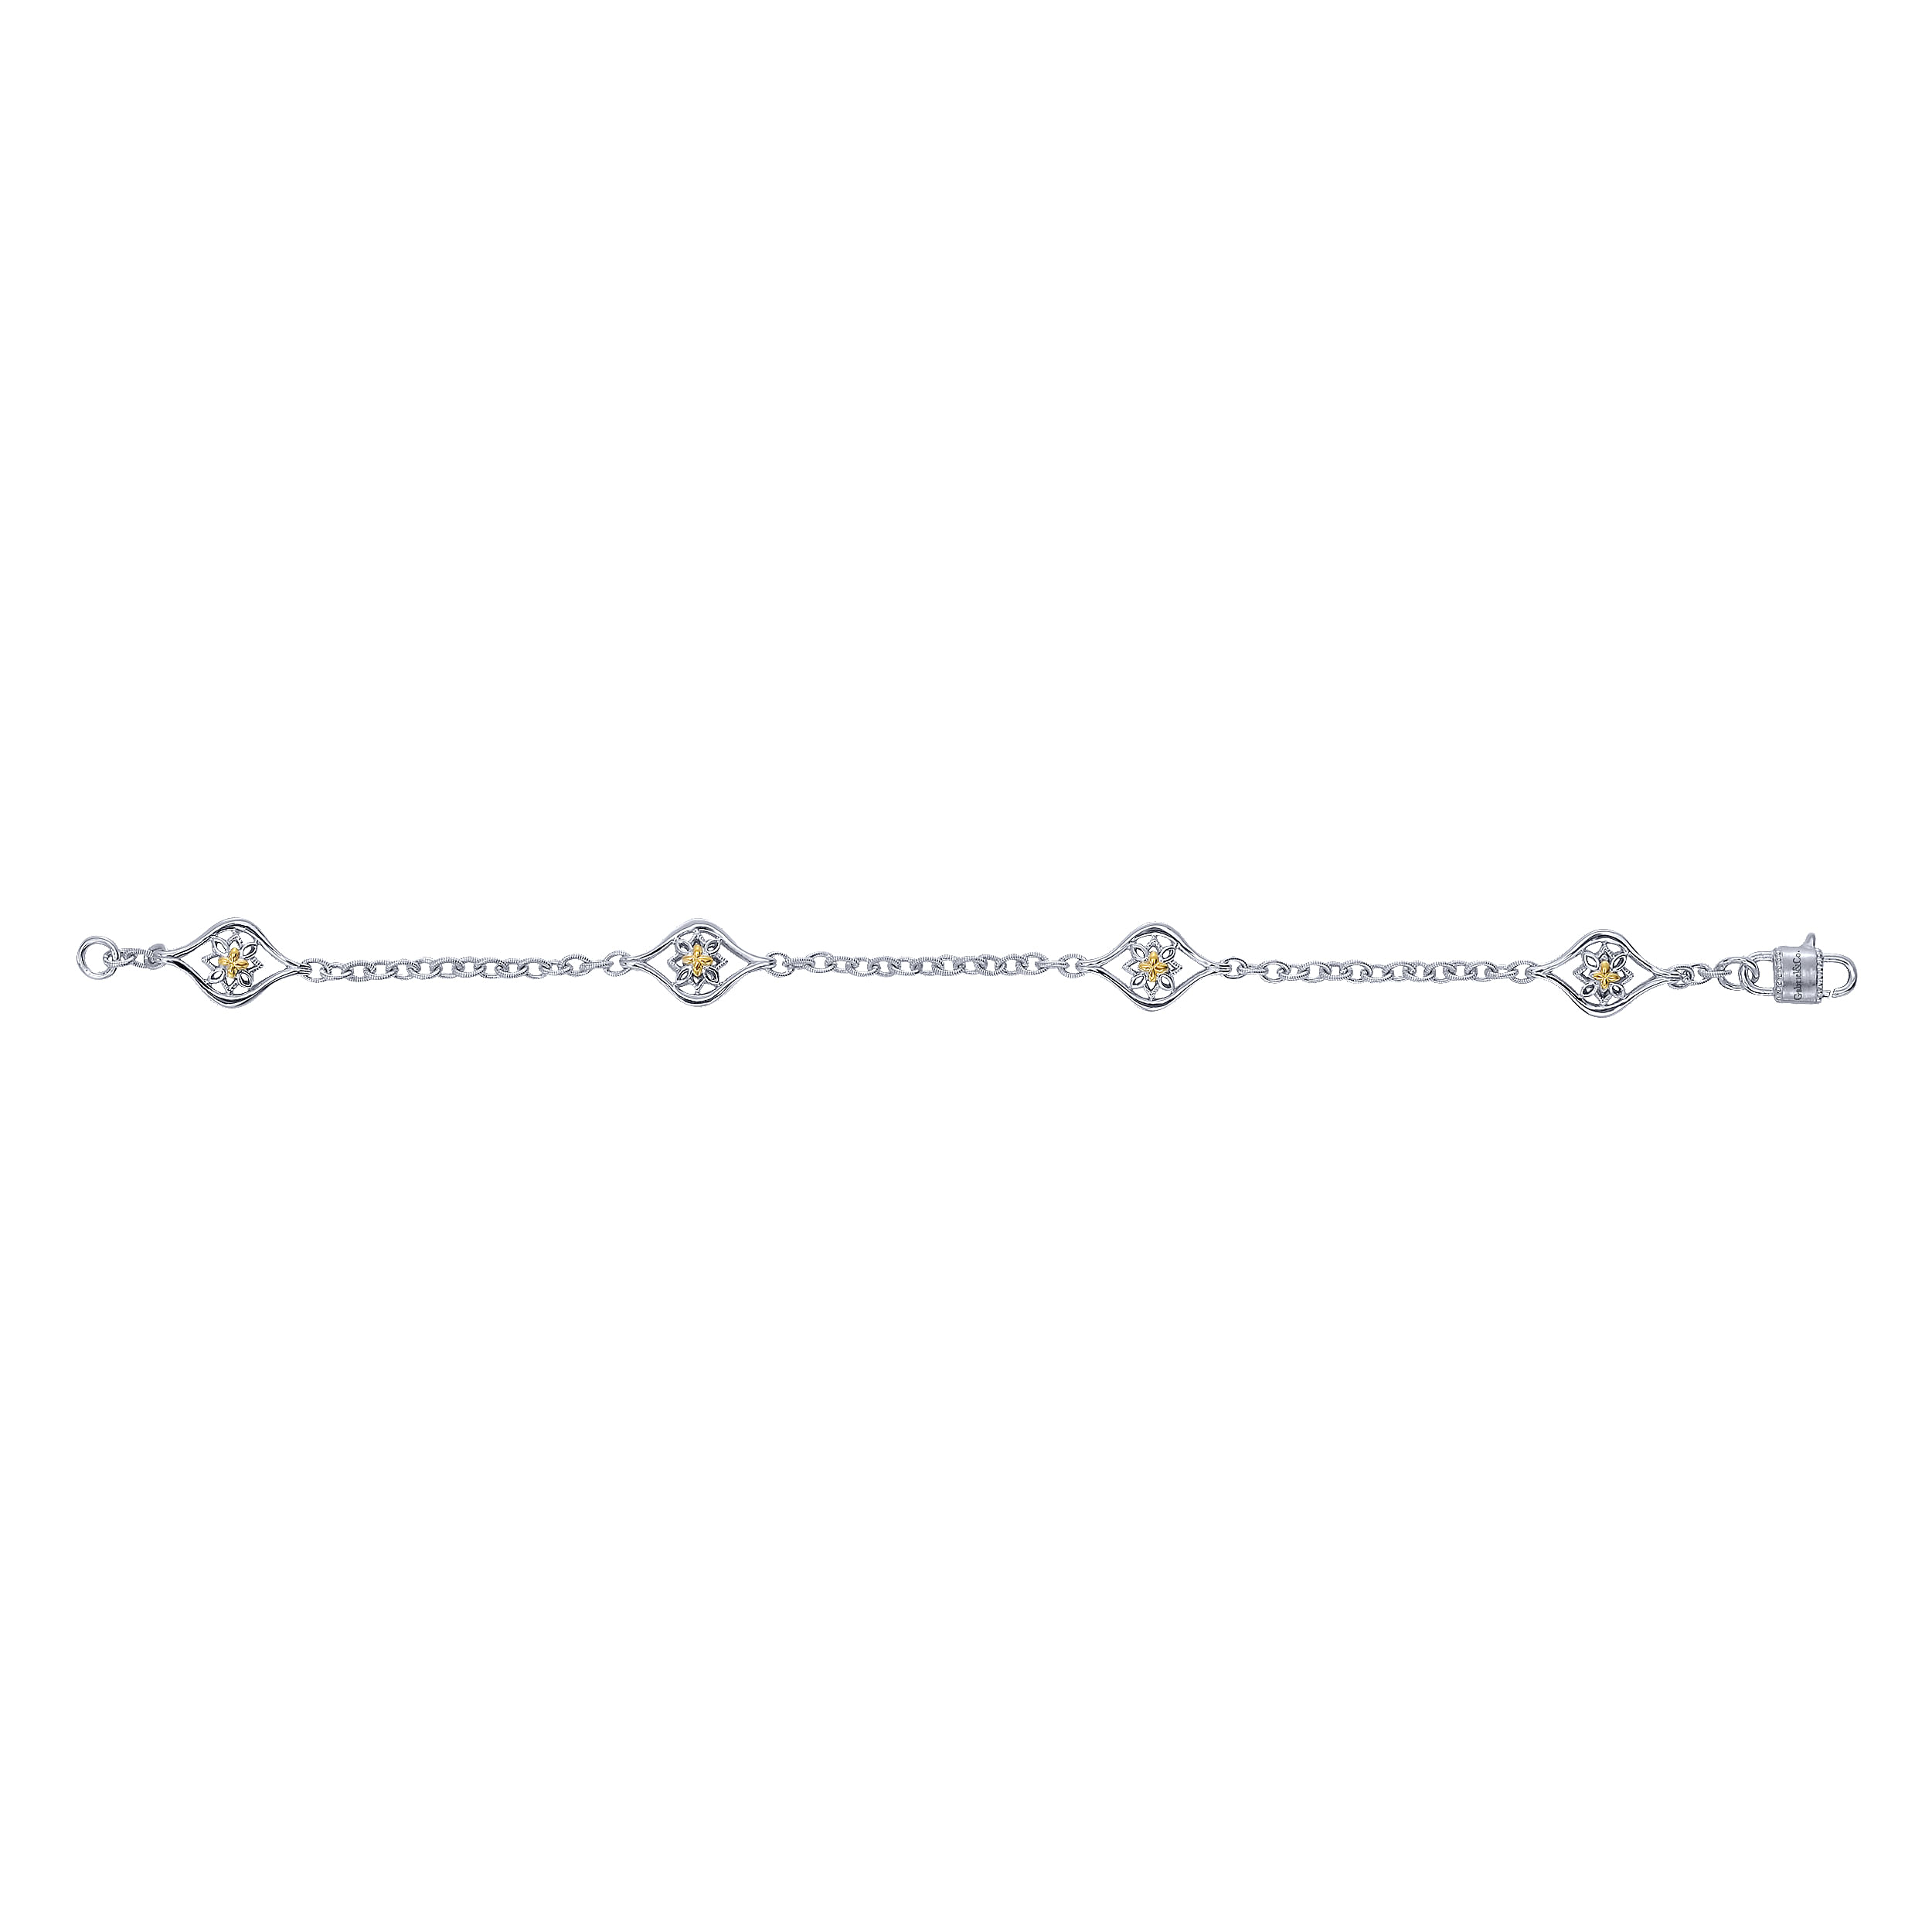 925 Sterling Silver-18K Yellow Gold Chain Bracelet with Filigree Stations